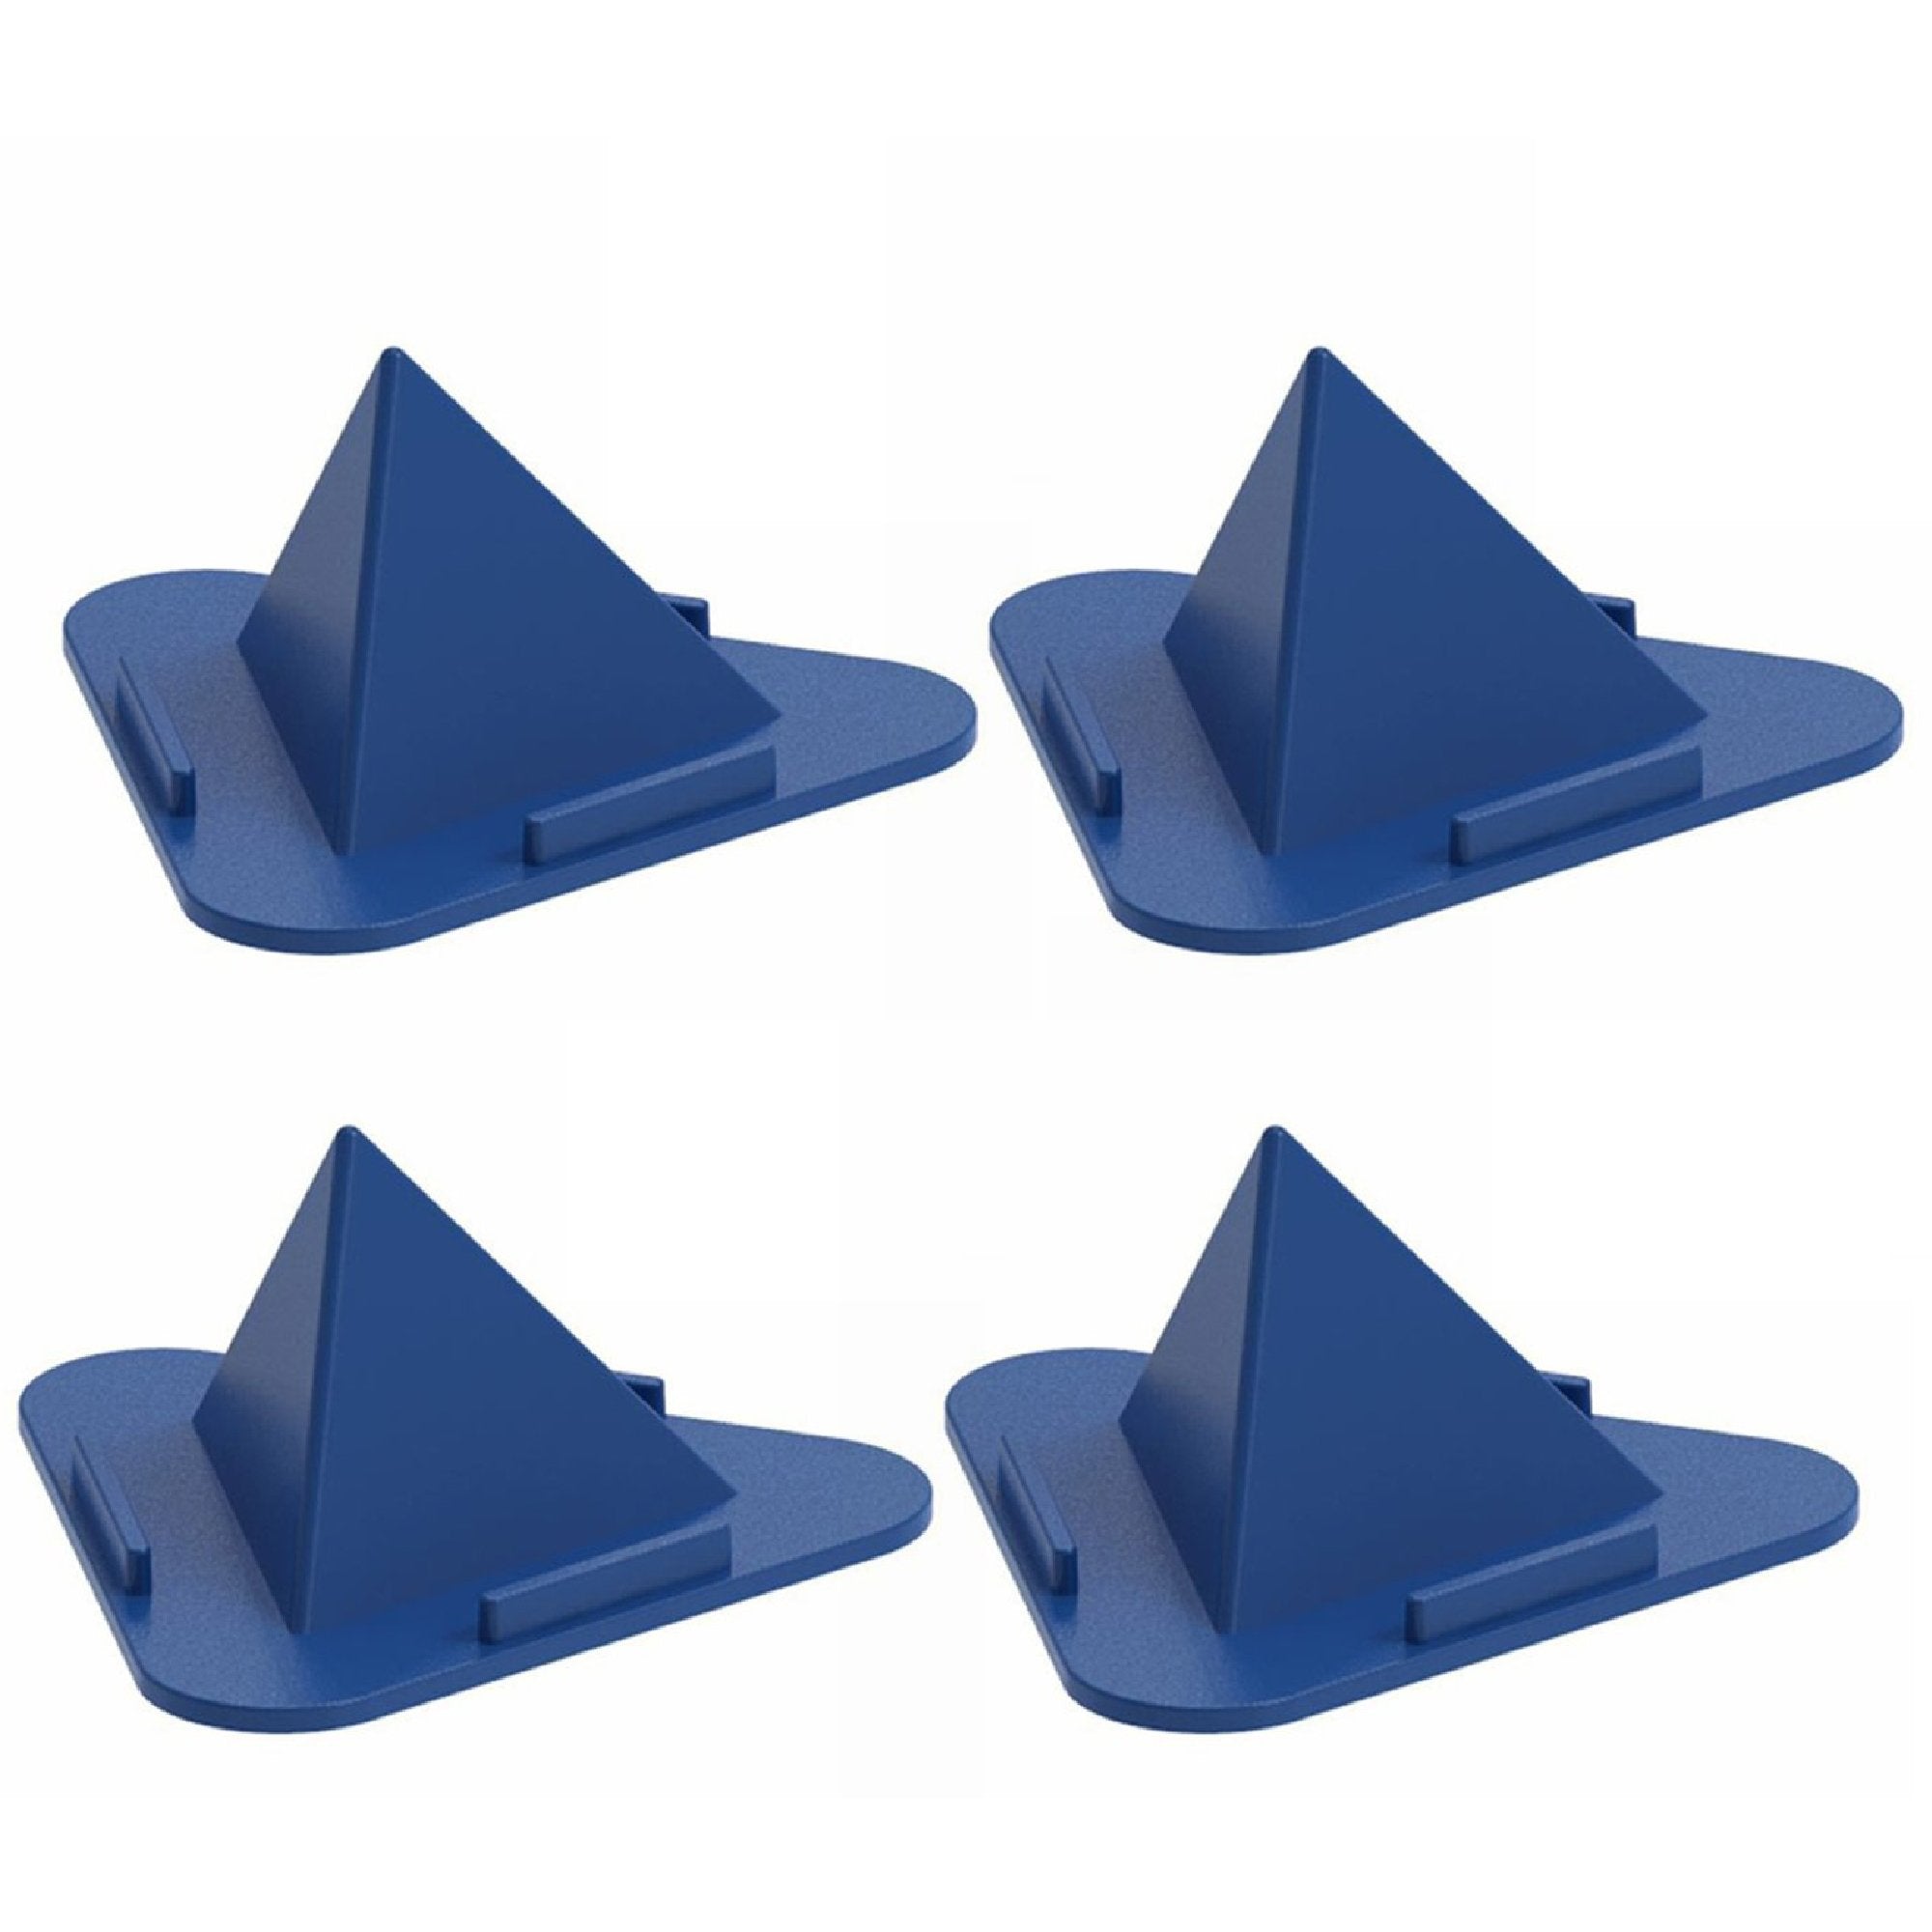 4640 Universal Portable Three-Sided Pyramid Shape Mobile Holder Stand - SkyShopy